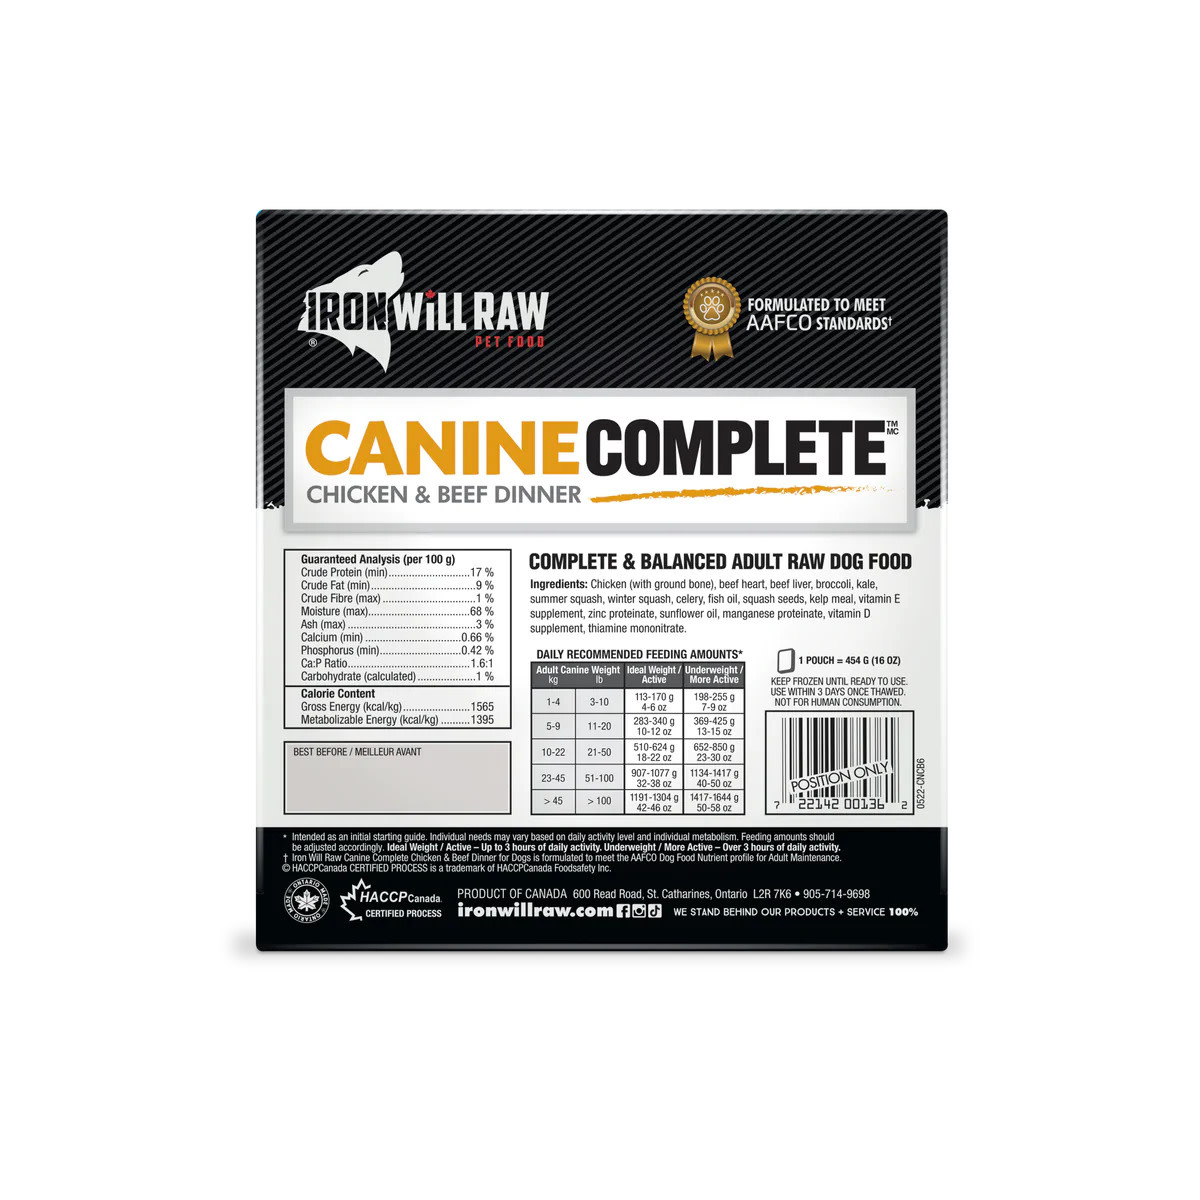 Iron Will Raw Iron Will Raw Canine Complete Chicken & Beef Dinner, 6lb